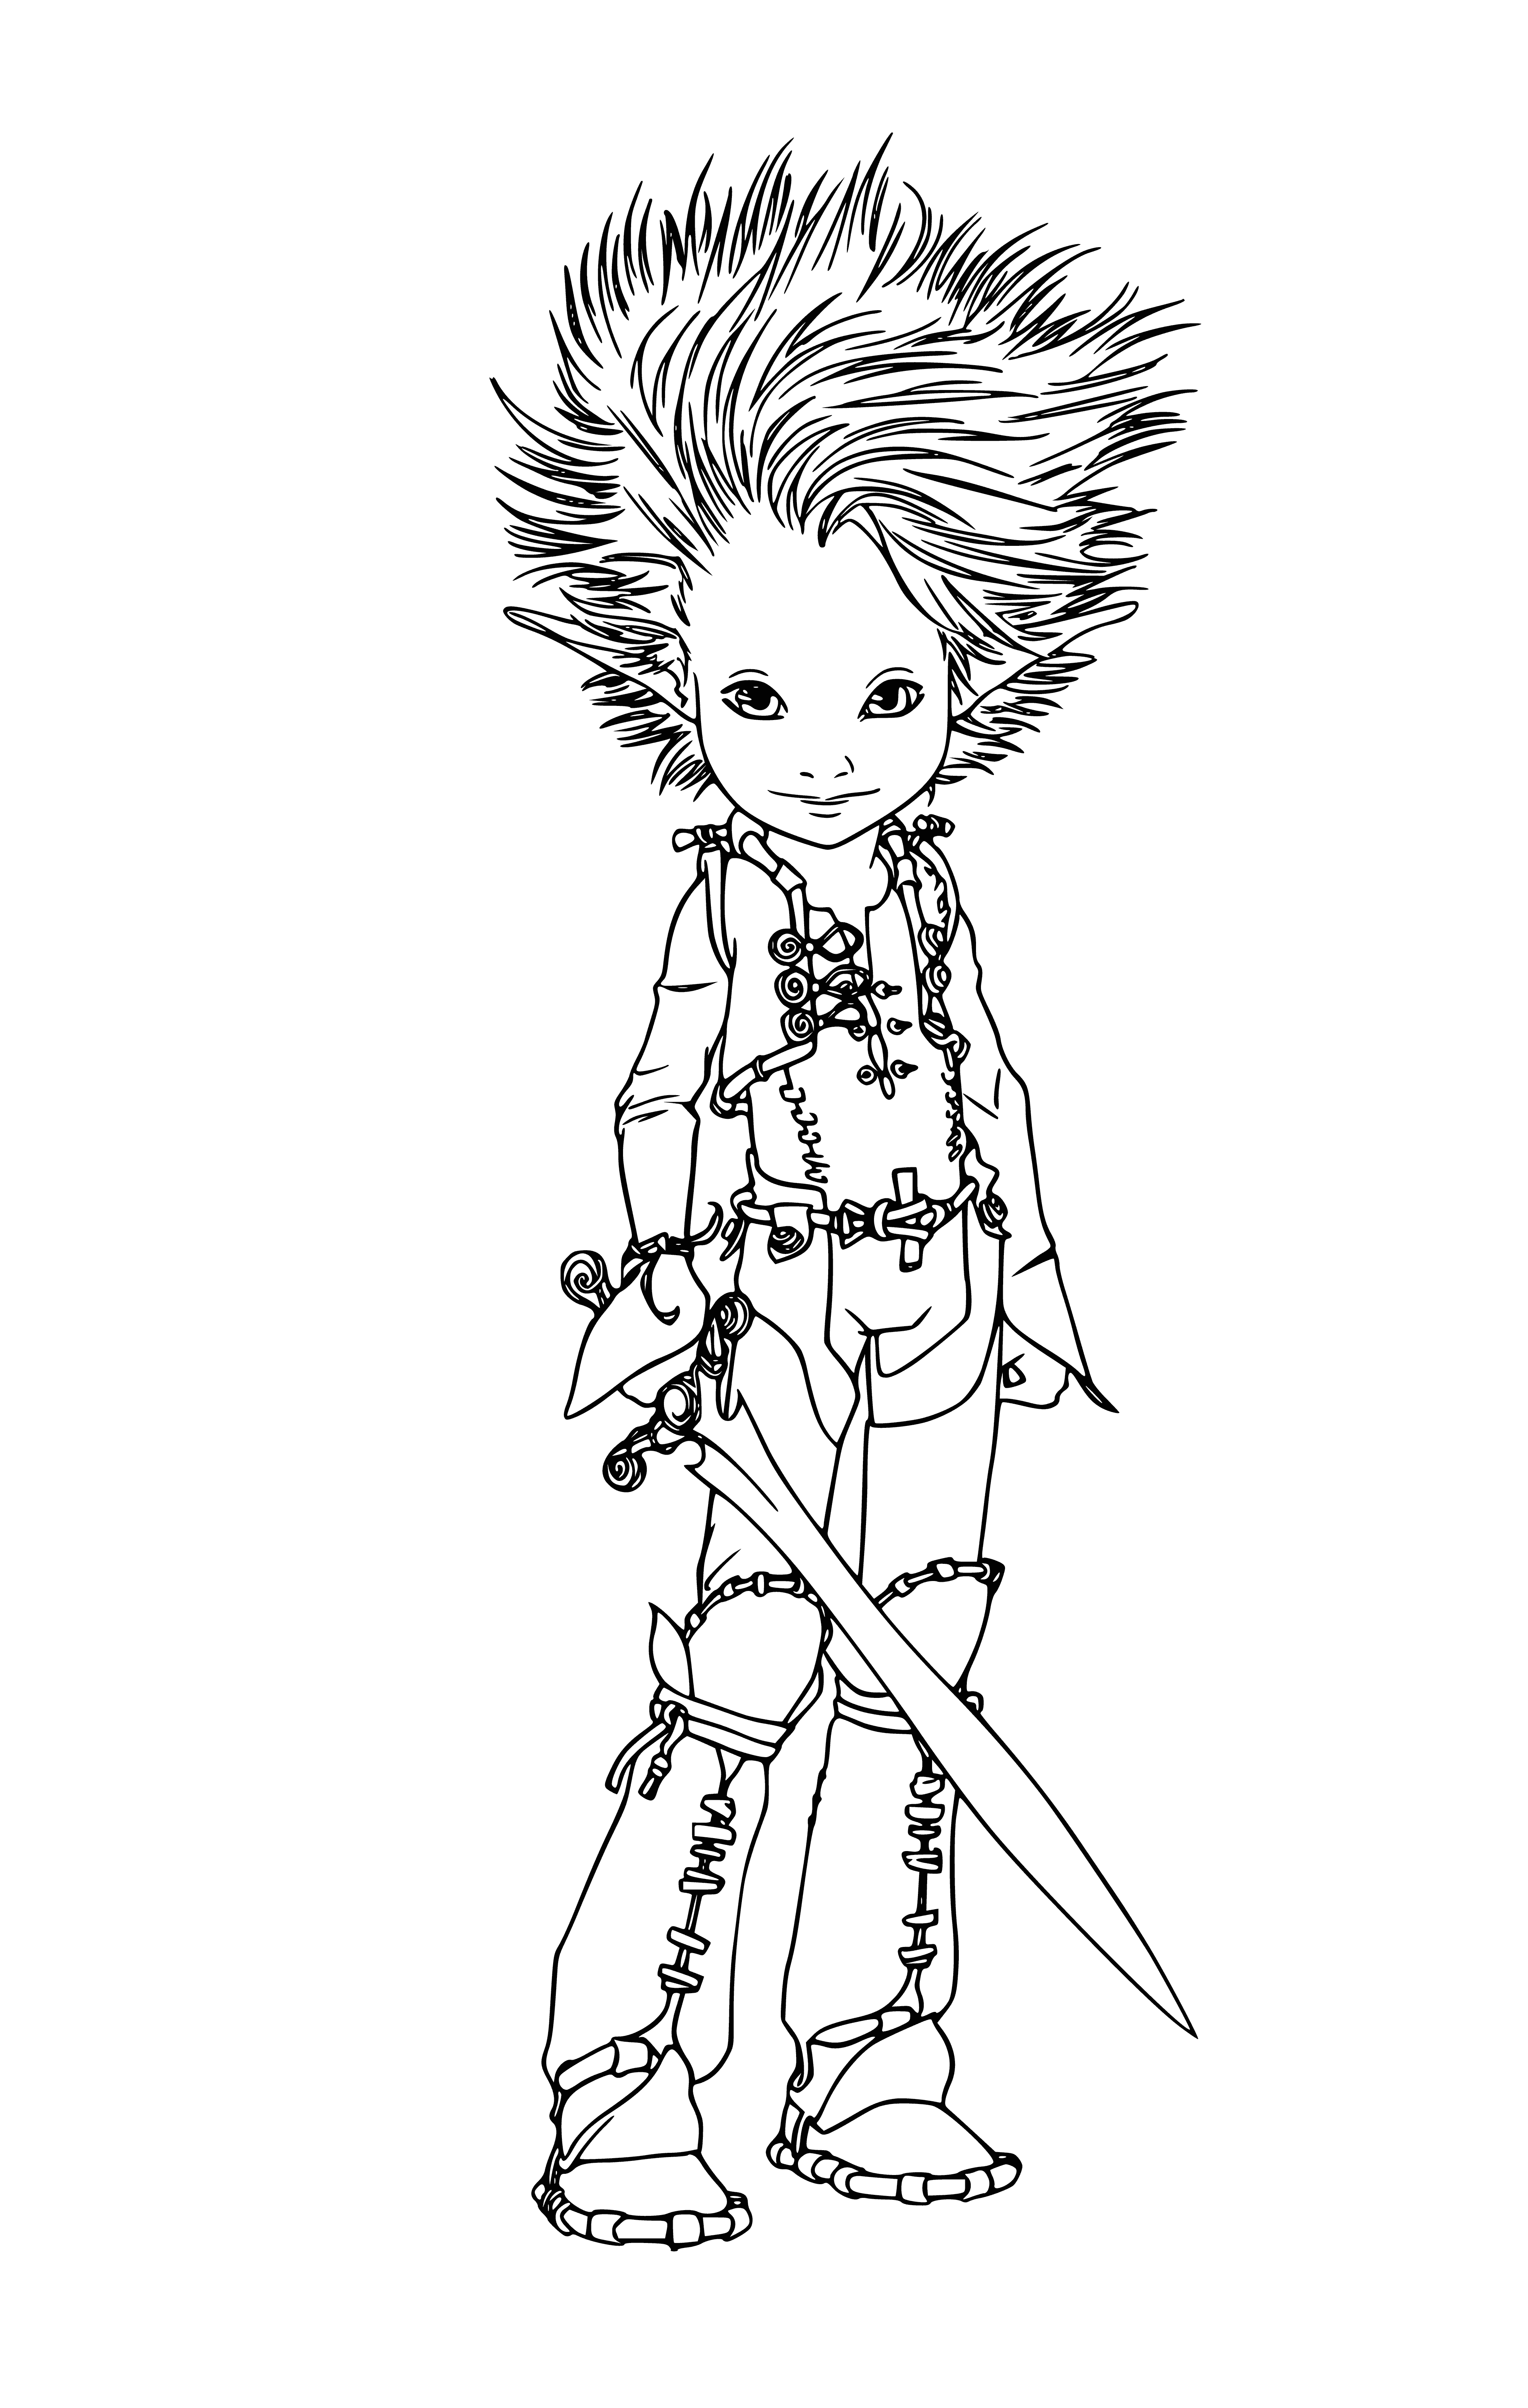 coloring page: Young Arthur ready to fight: blue shirt, brown pants, sword in hand, serious look.